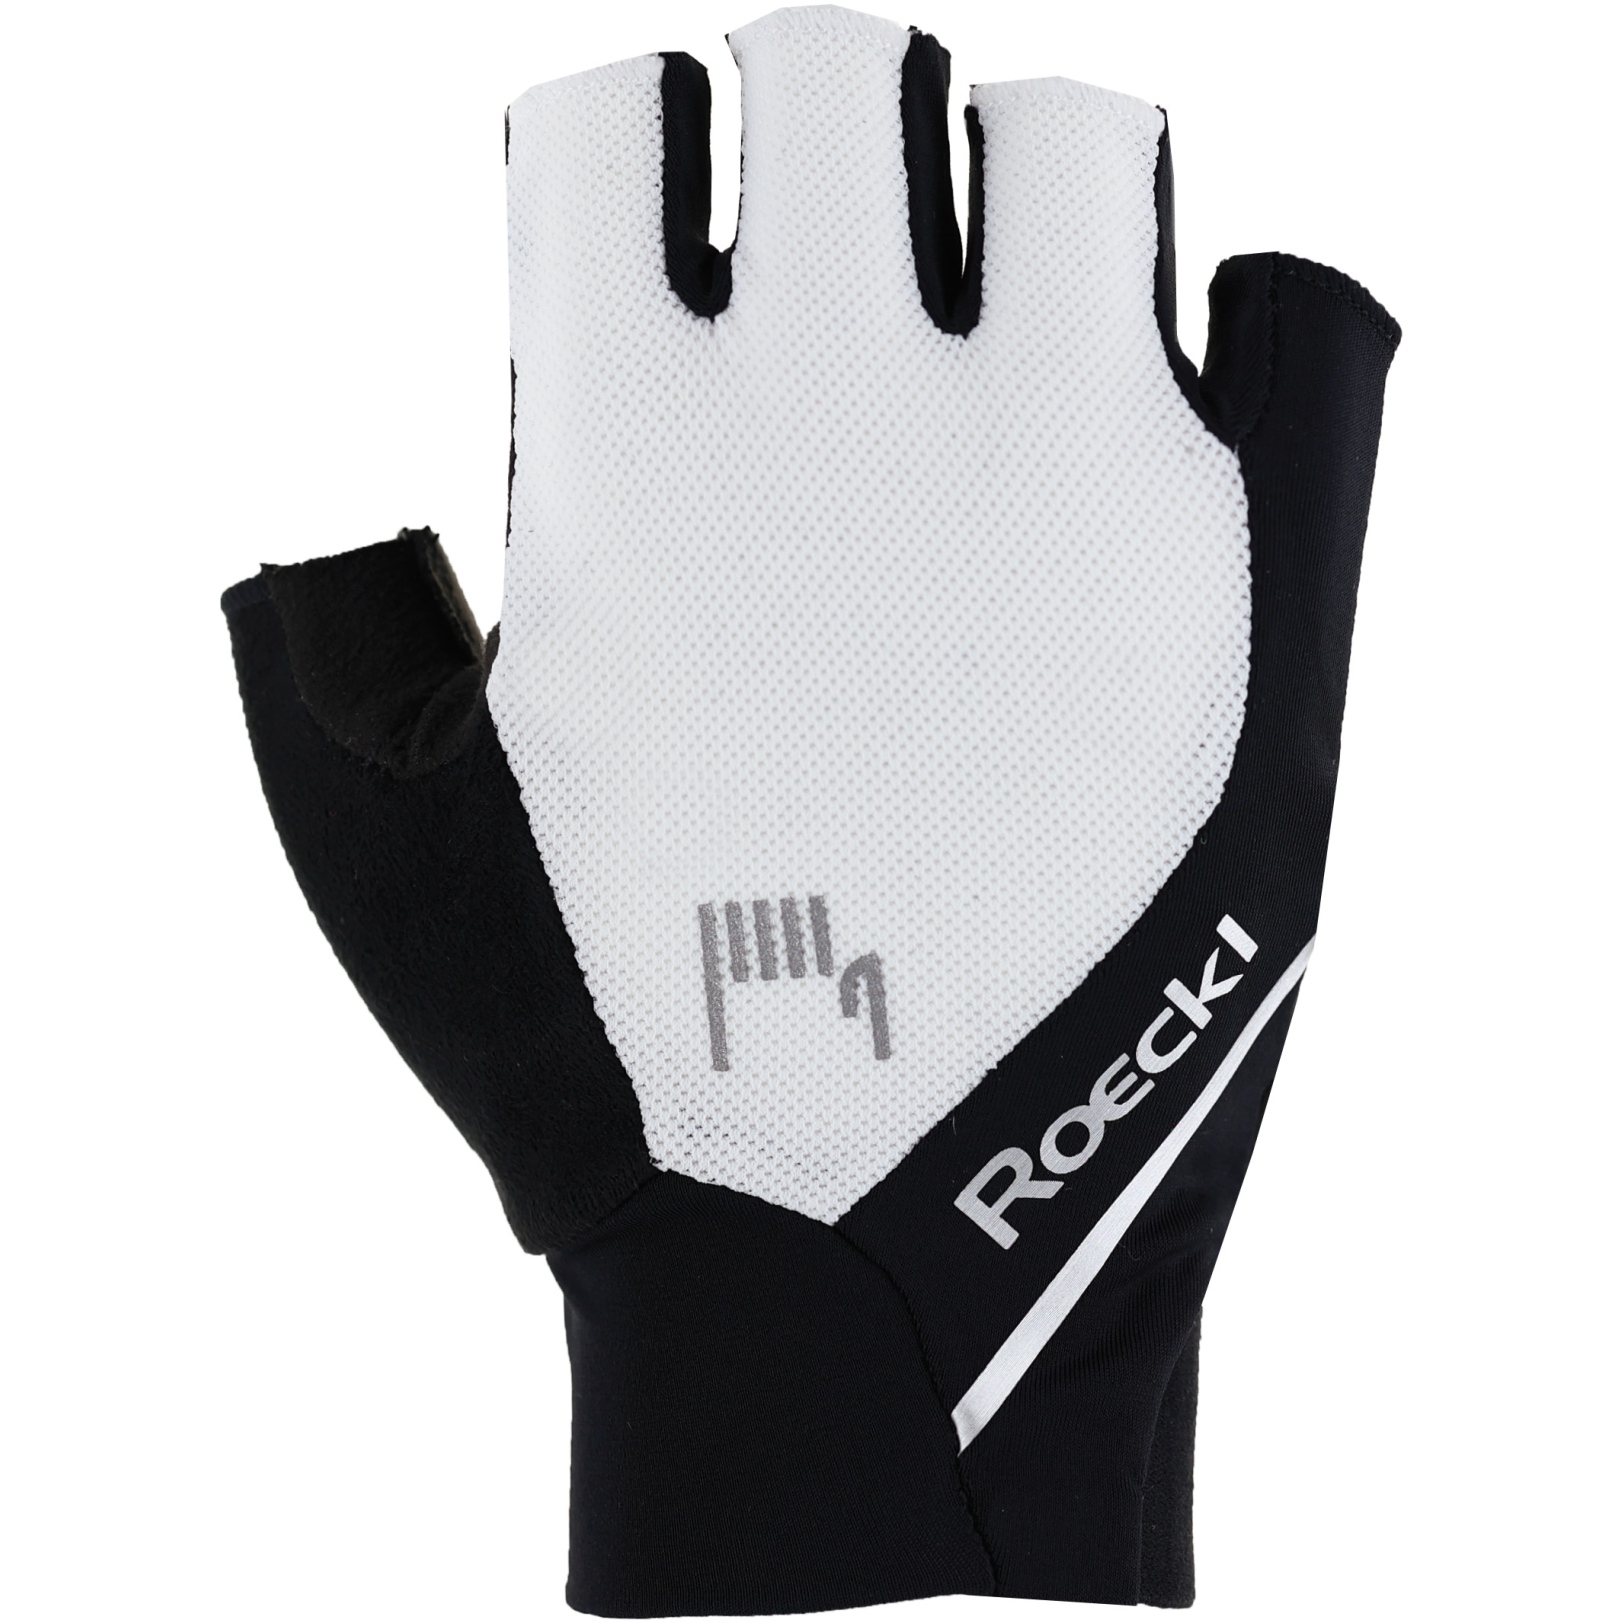 Picture of Roeckl Sports Ivory 2 Cycling Gloves - white/black 1009